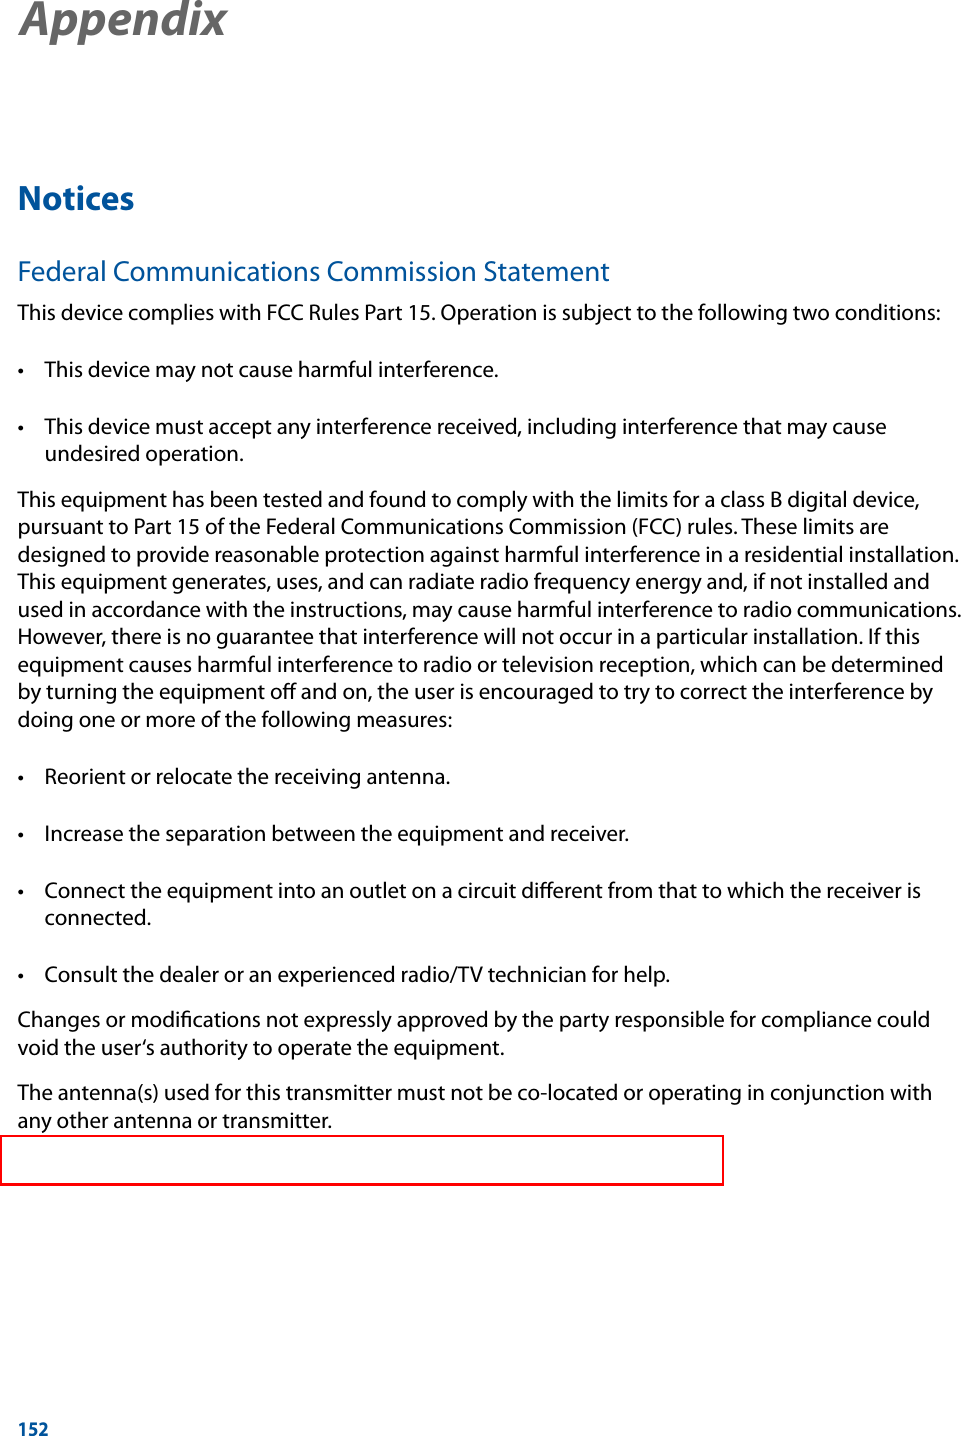 152NoticesFederal Communications Commission StatementThis device complies with FCC Rules Part 15. Operation is subject to the following two conditions:  undesired operation.This equipment has been tested and found to comply with the limits for a class B digital device, pursuant to Part 15 of the Federal Communications Commission (FCC) rules. These limits are designed to provide reasonable protection against harmful interference in a residential installation. This equipment generates, uses, and can radiate radio frequency energy and, if not installed and used in accordance with the instructions, may cause harmful interference to radio communications. However, there is no guarantee that interference will not occur in a particular installation. If this equipment causes harmful interference to radio or television reception, which can be determined by turning the equipment oﬀ and on, the user is encouraged to try to correct the interference by doing one or more of the following measures:   connected. Changes or modiﬁcations not expressly approved by the party responsible for compliance could void the user‘s authority to operate the equipment.The antenna(s) used for this transmitter must not be co-located or operating in conjunction with any other antenna or transmitter.AppendixAppendix 